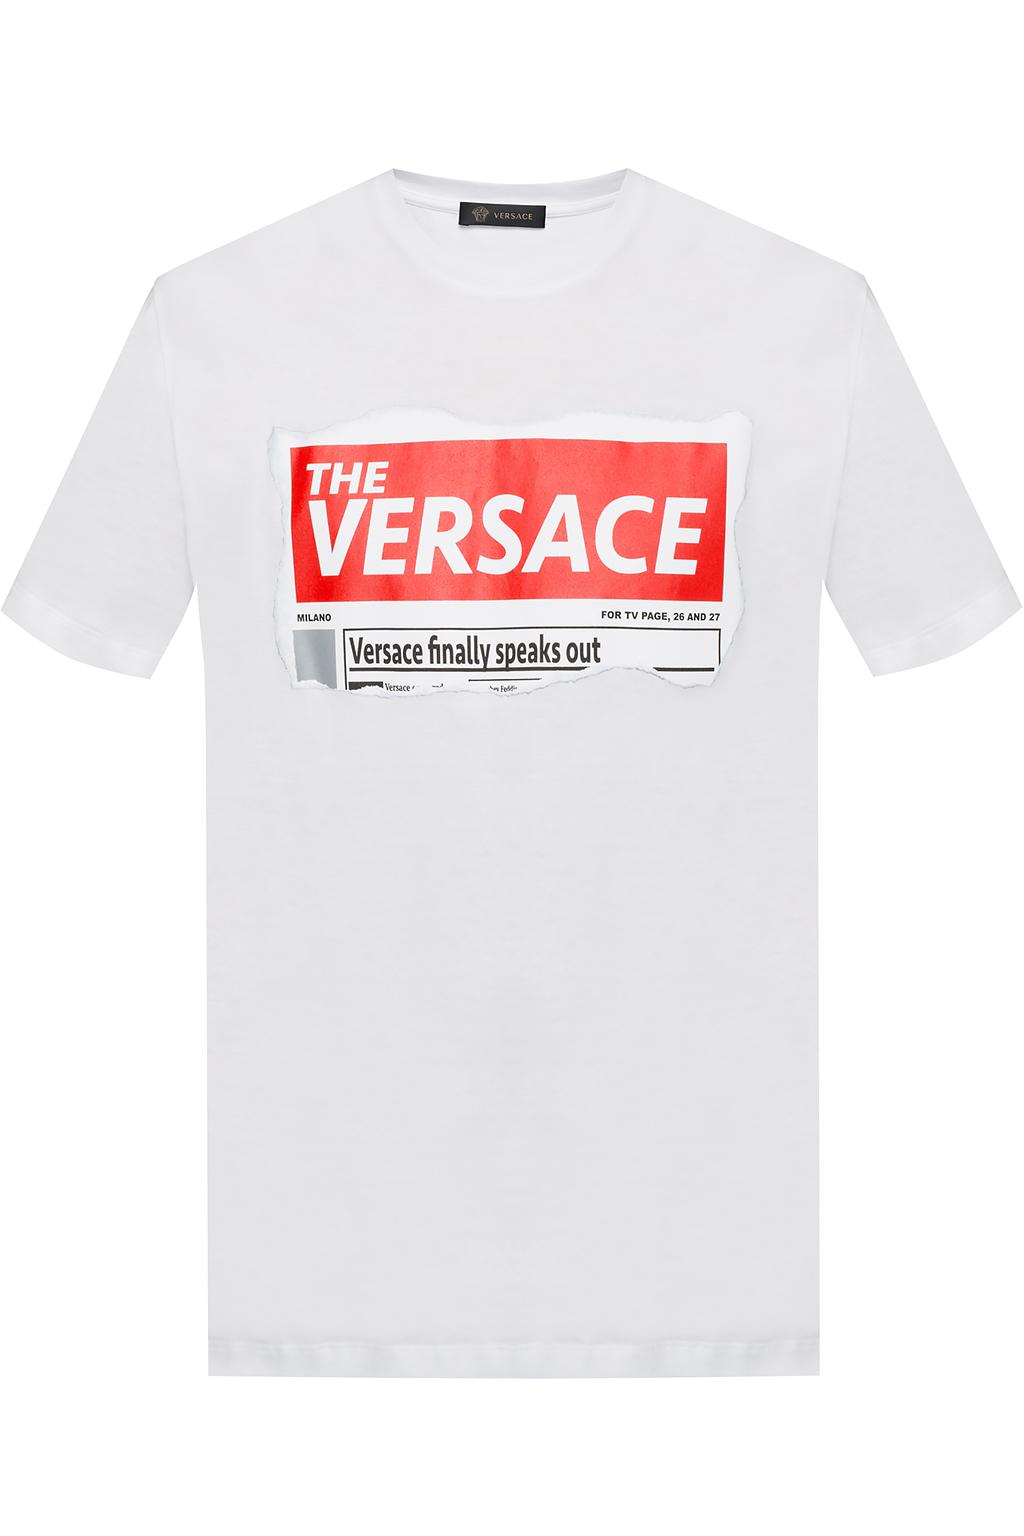 versace finally speaks out t shirt